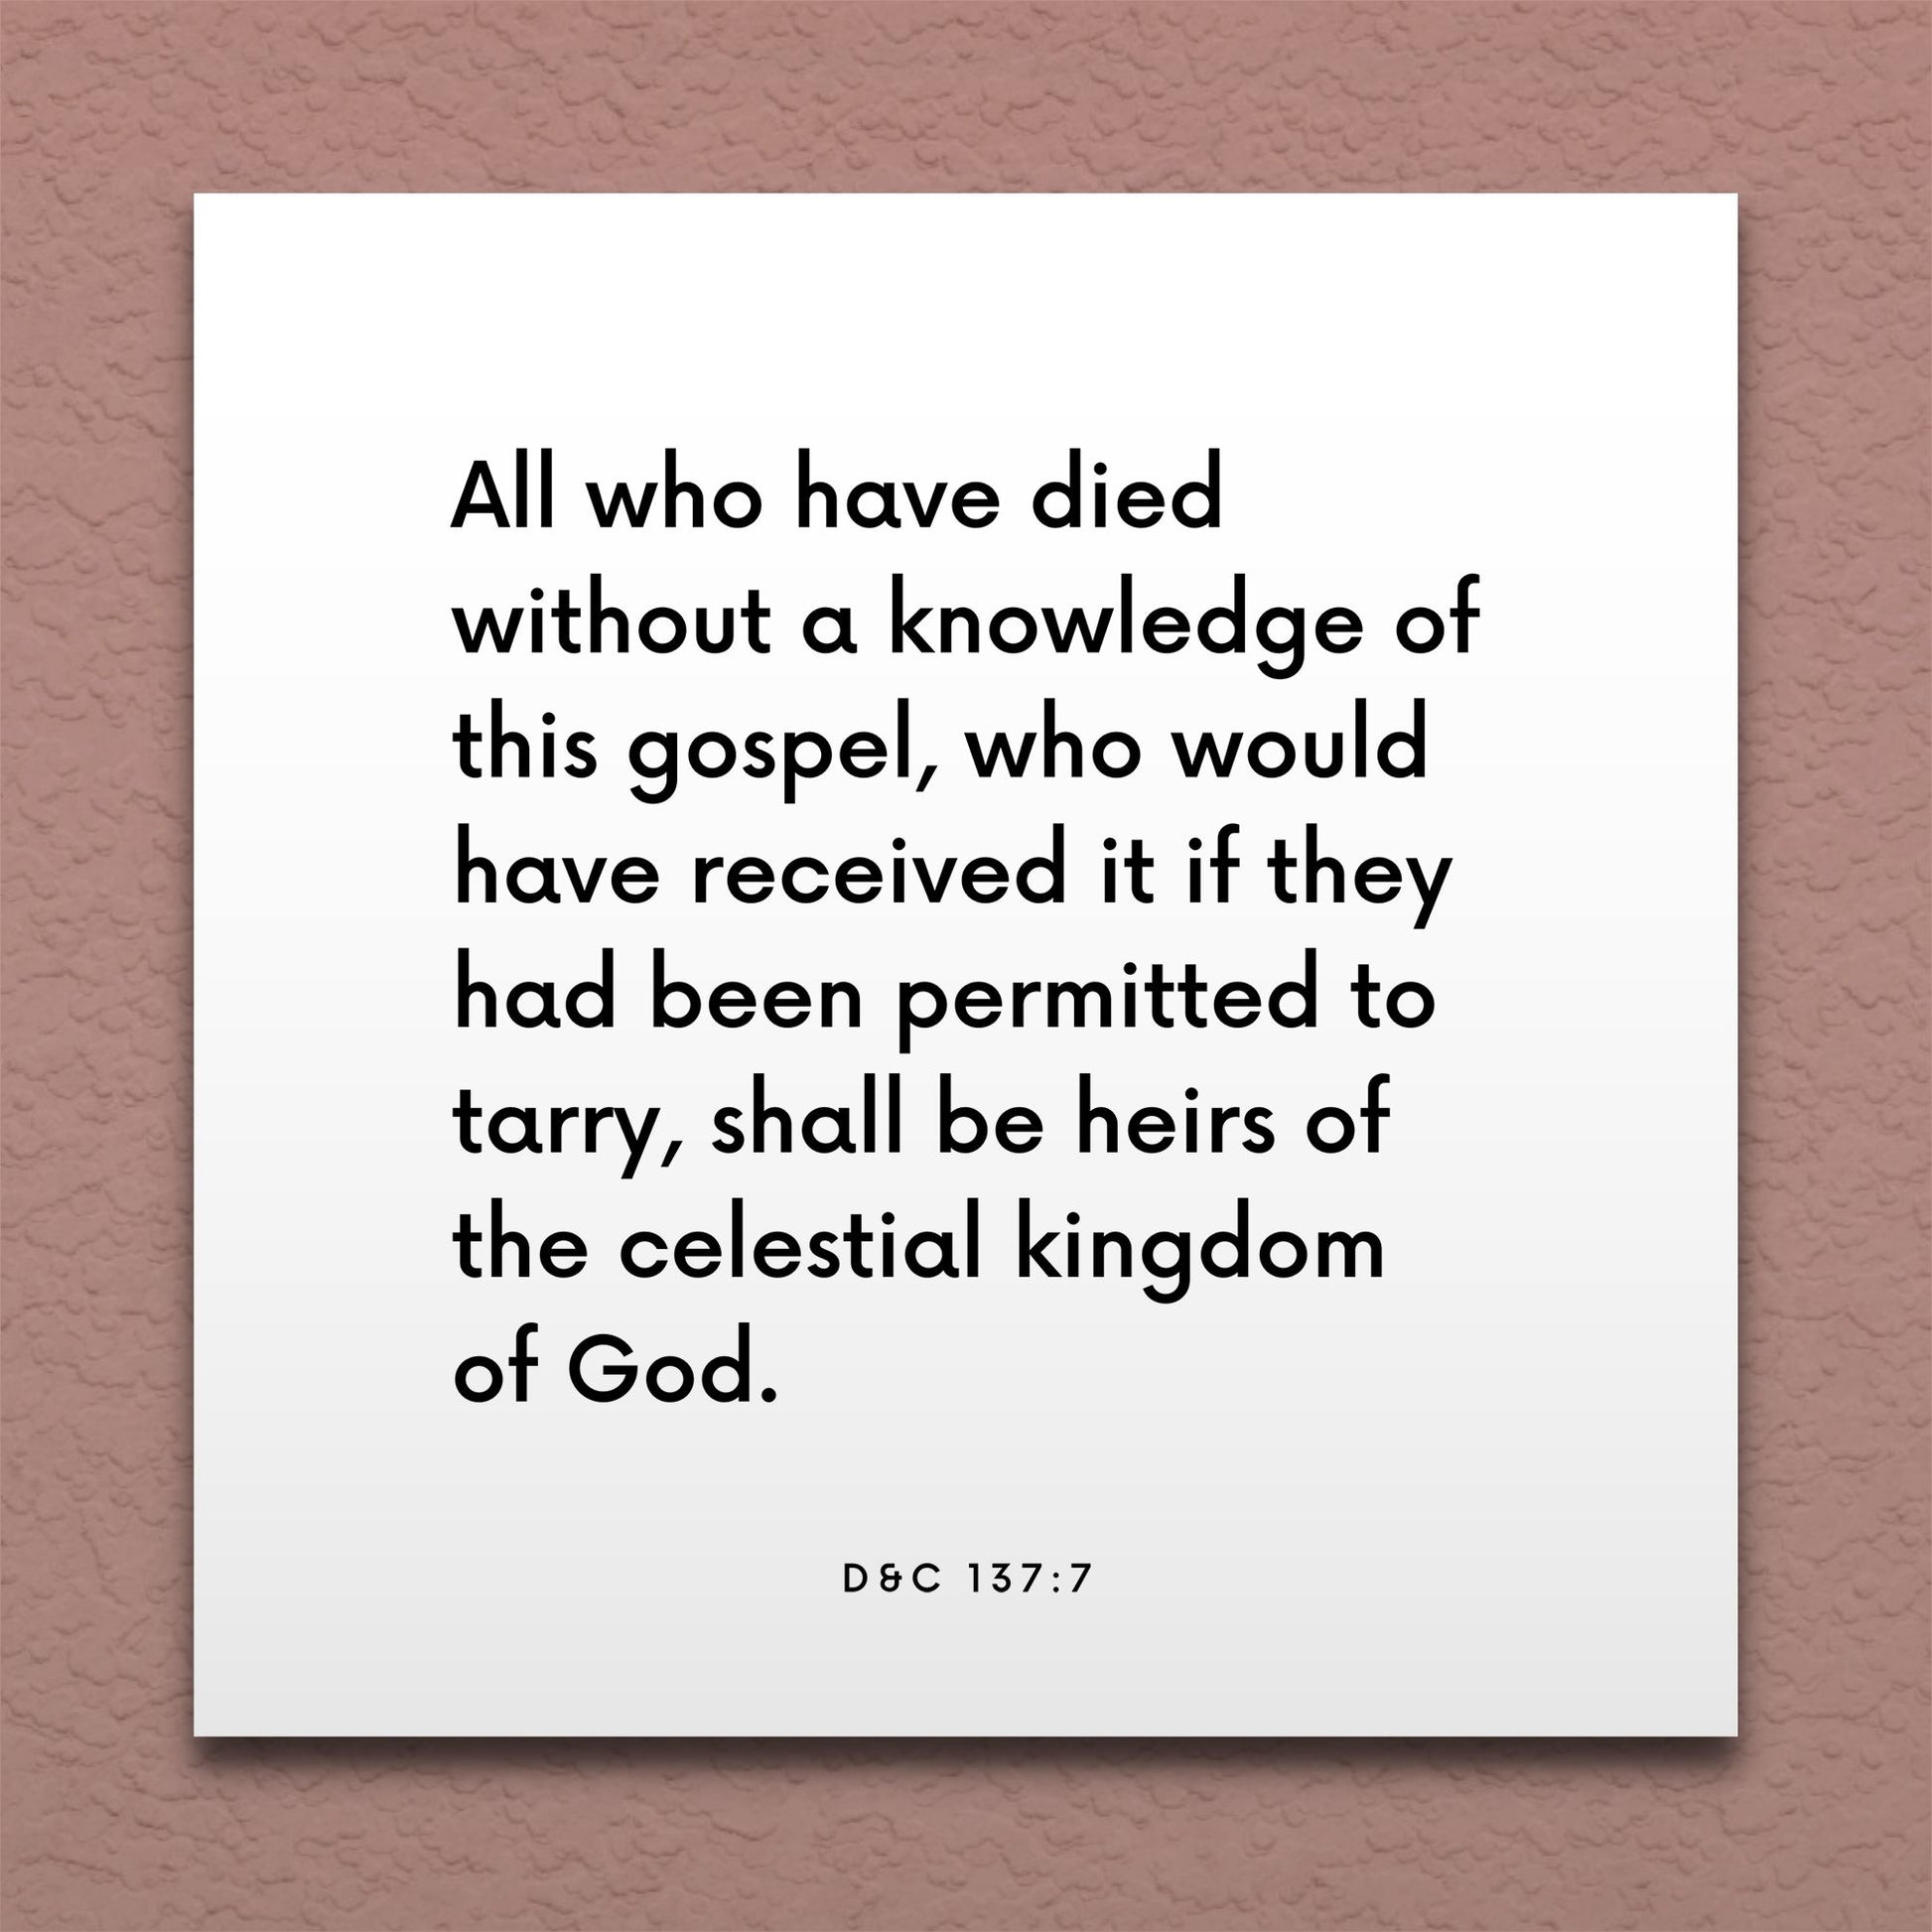 Wall-mounted scripture tile for D&C 137:7 - "All who have died without a knowledge of this gospel"